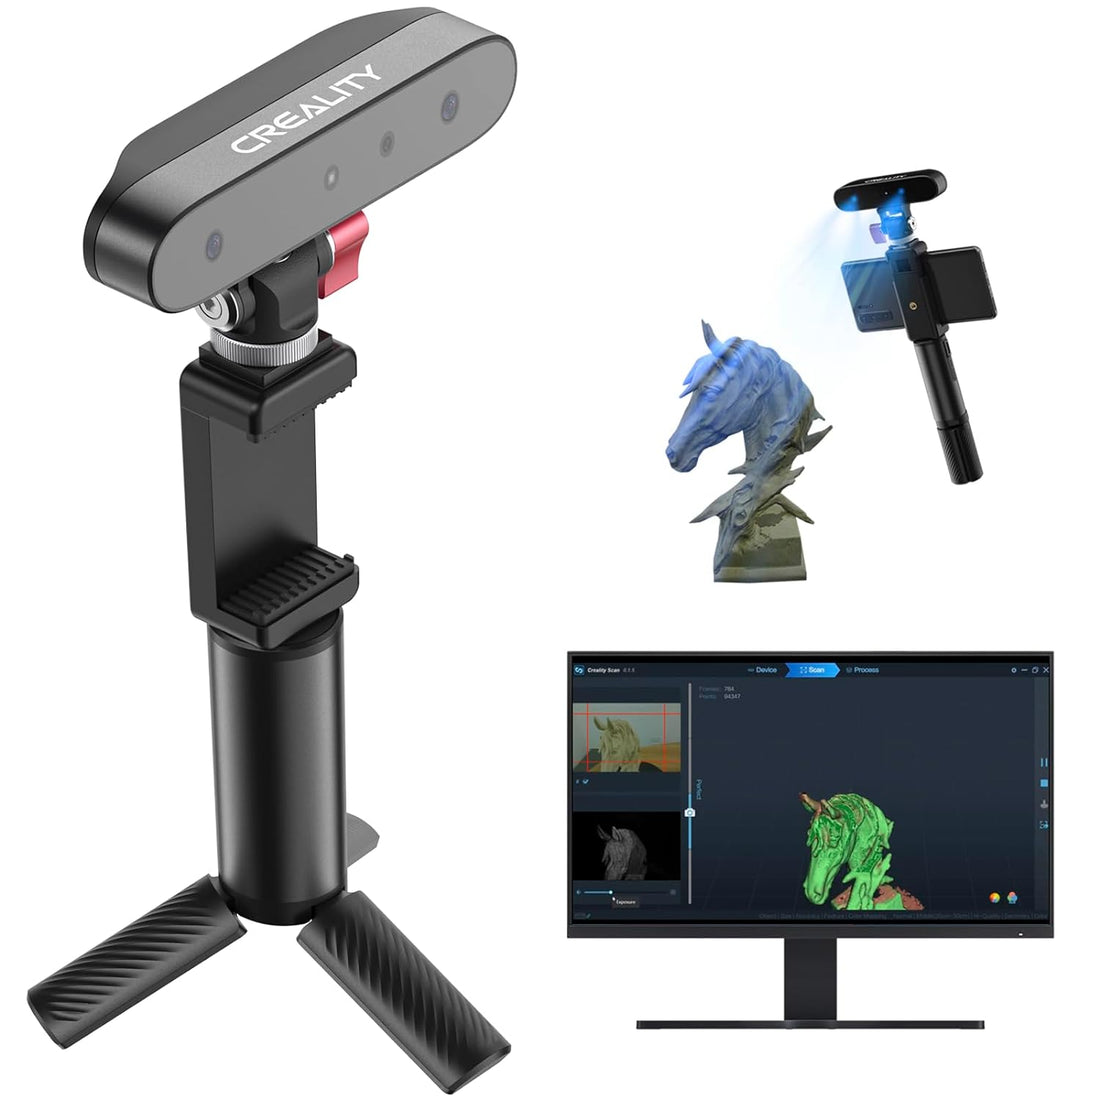 Official Creality 3D Scanner CR-Scan Ferret for 3D Printing Printer Upgrade Handheld 3D Model Scan Machine 30 FPS Scanning Speed 0.1mm Accuracy Dual Mode Full Color for Android Phone PC Mac Win 10/11